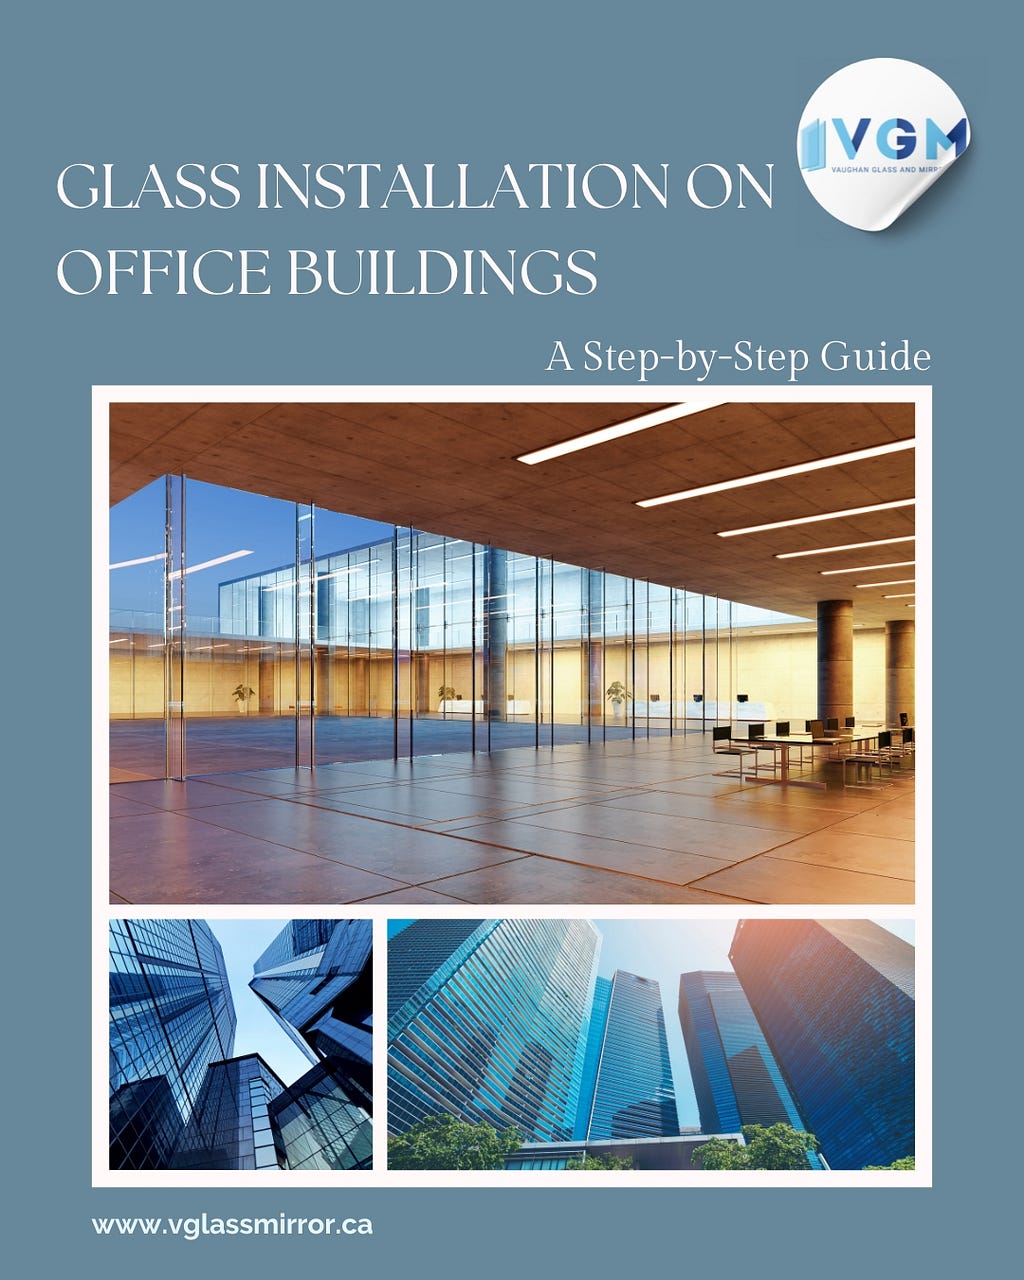 Glass Installation on Office Buildings: A Step-by-Step Guide